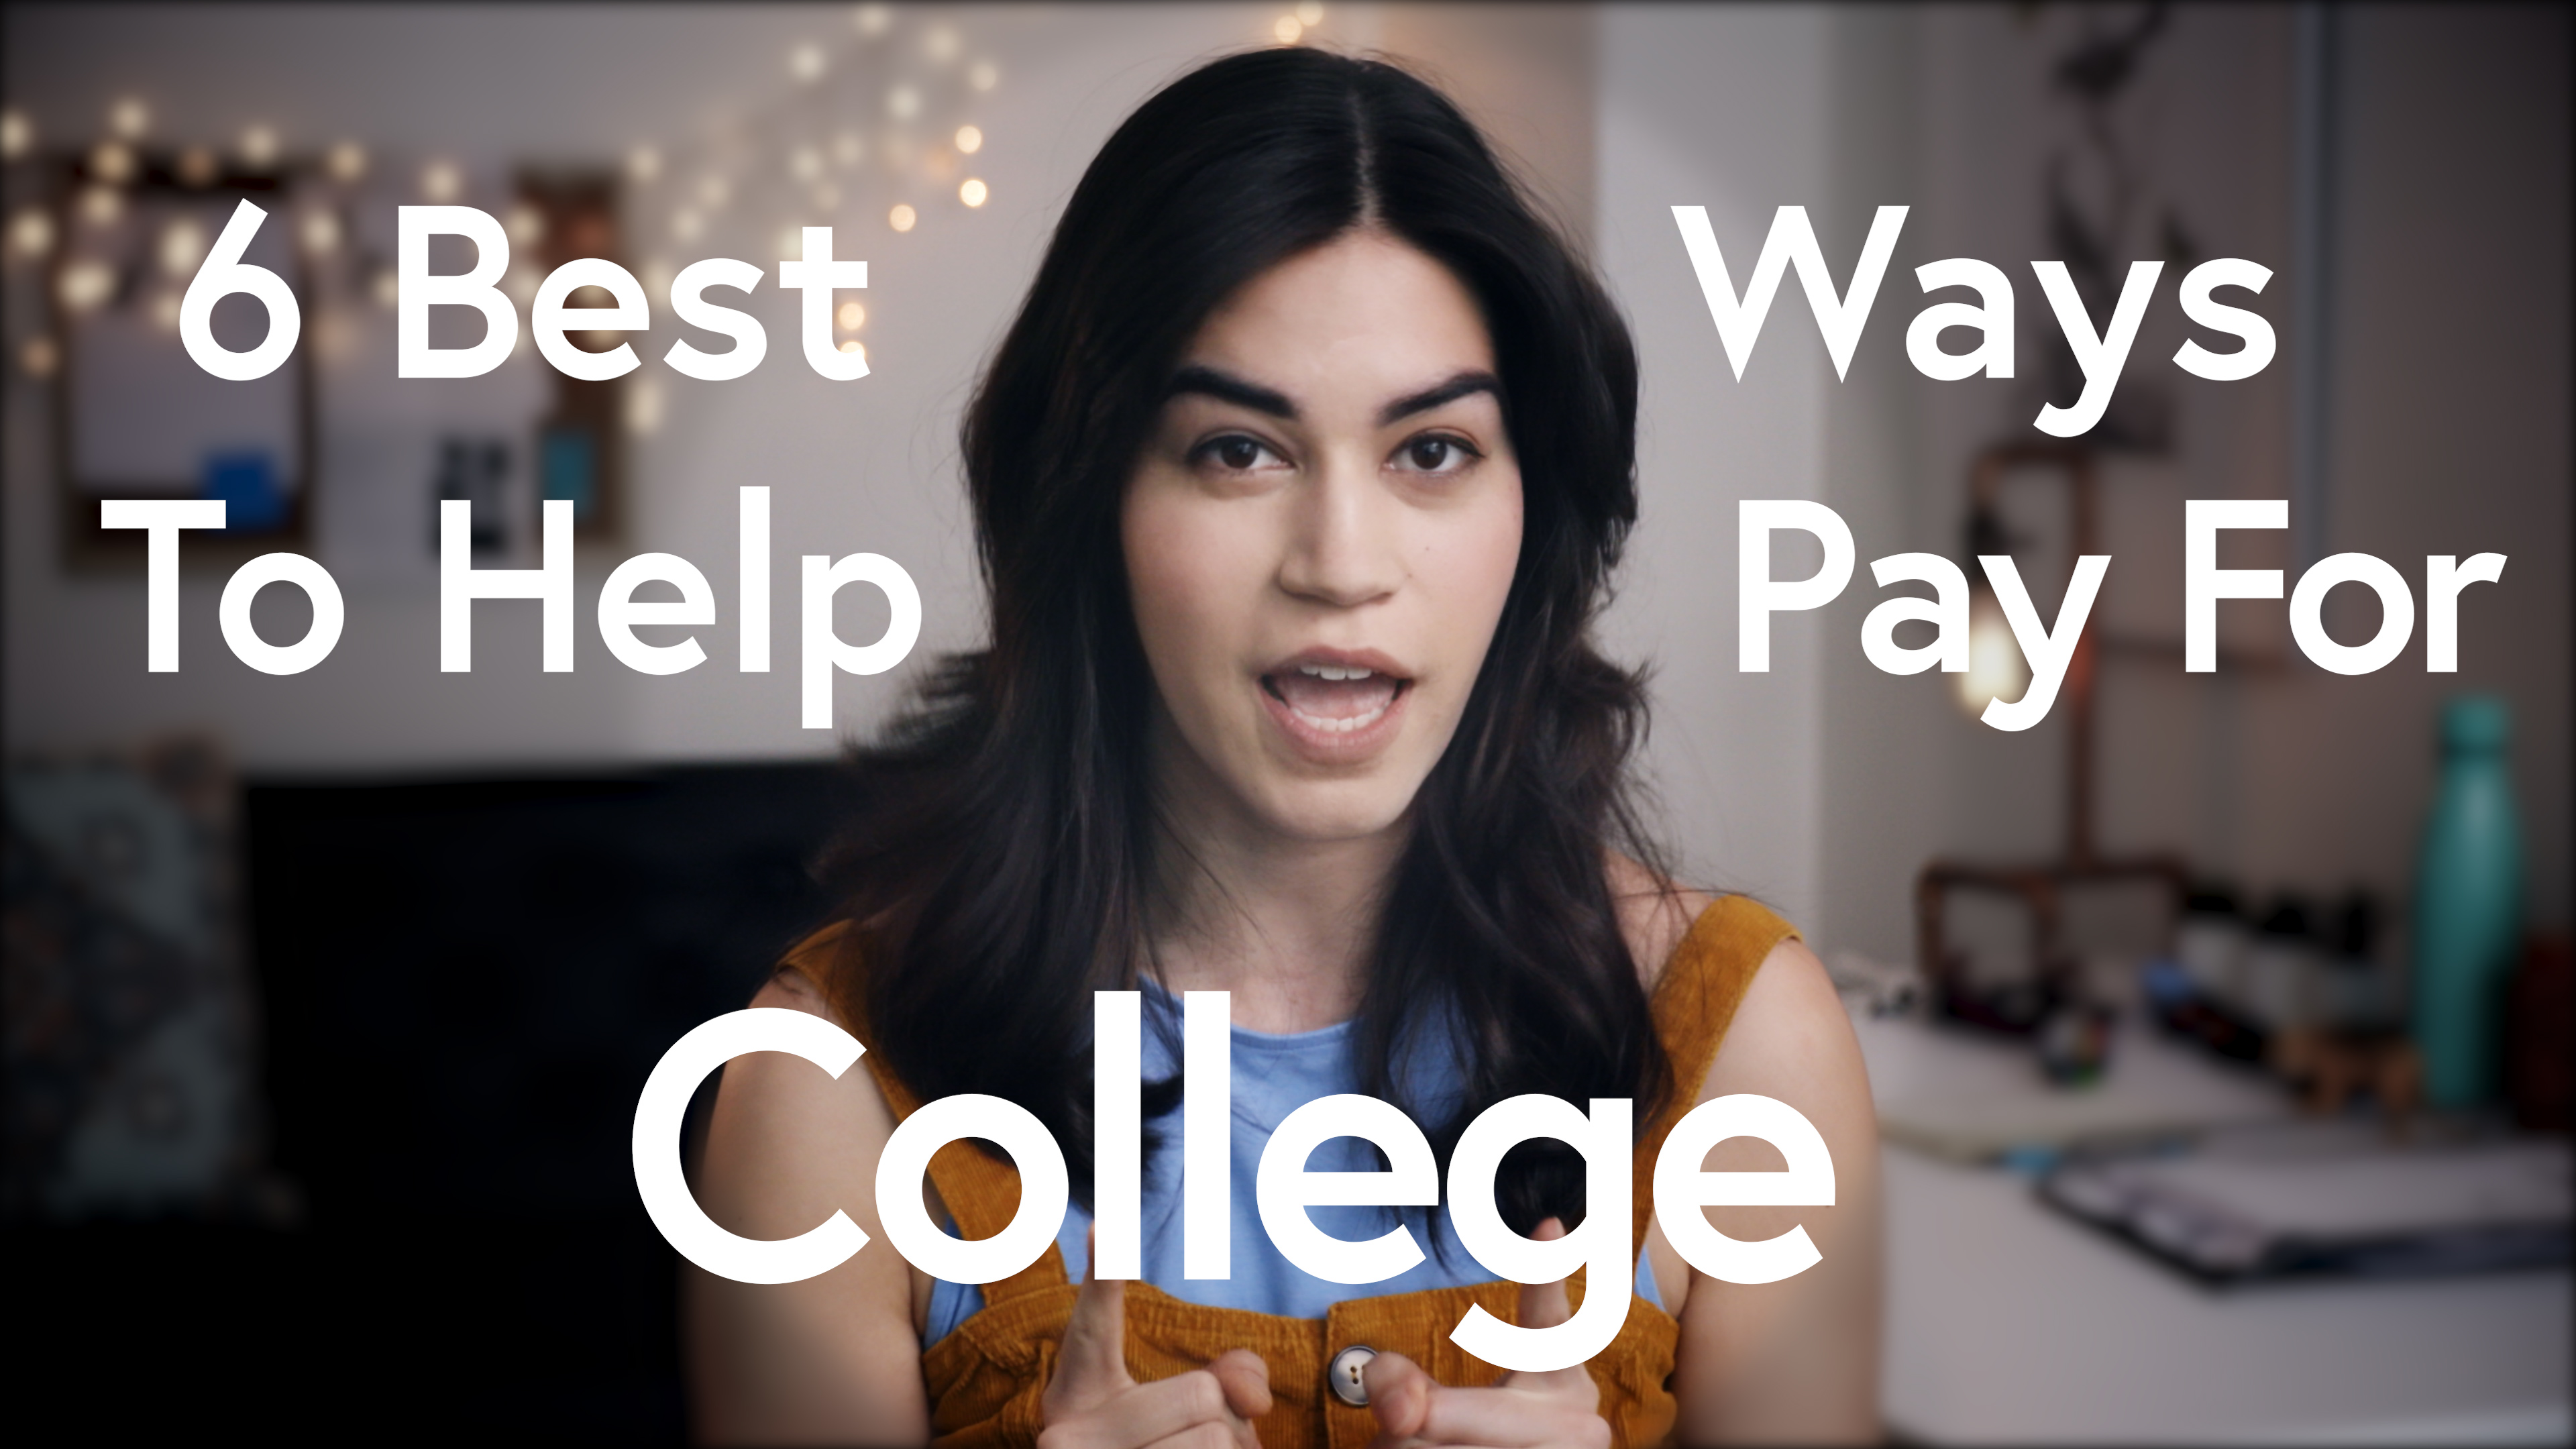 6 best ways to help pay for college.